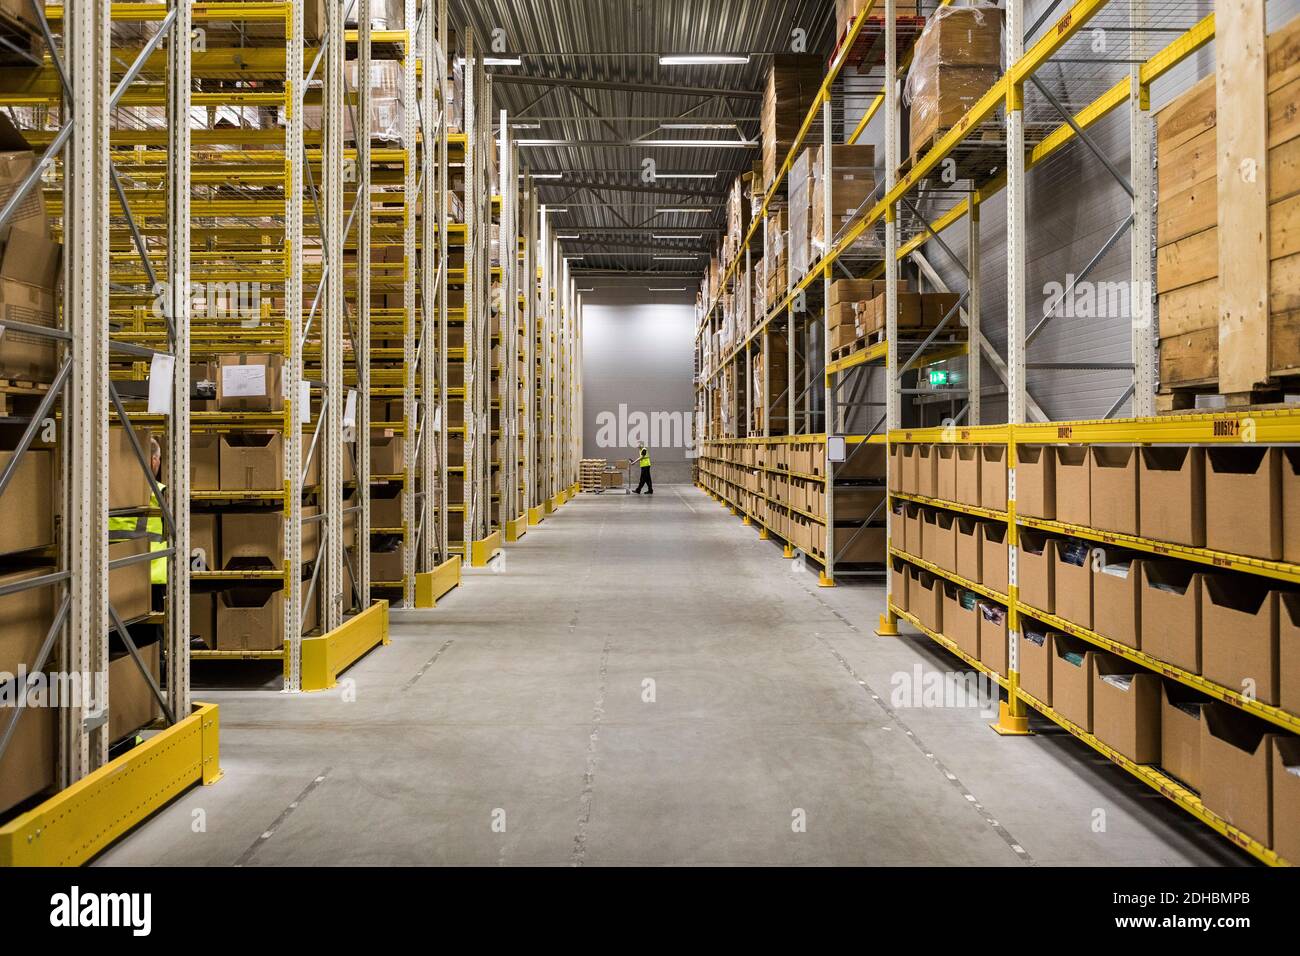 Aisle amidst packages on racks at illuminated distribution warehouse Stock Photo